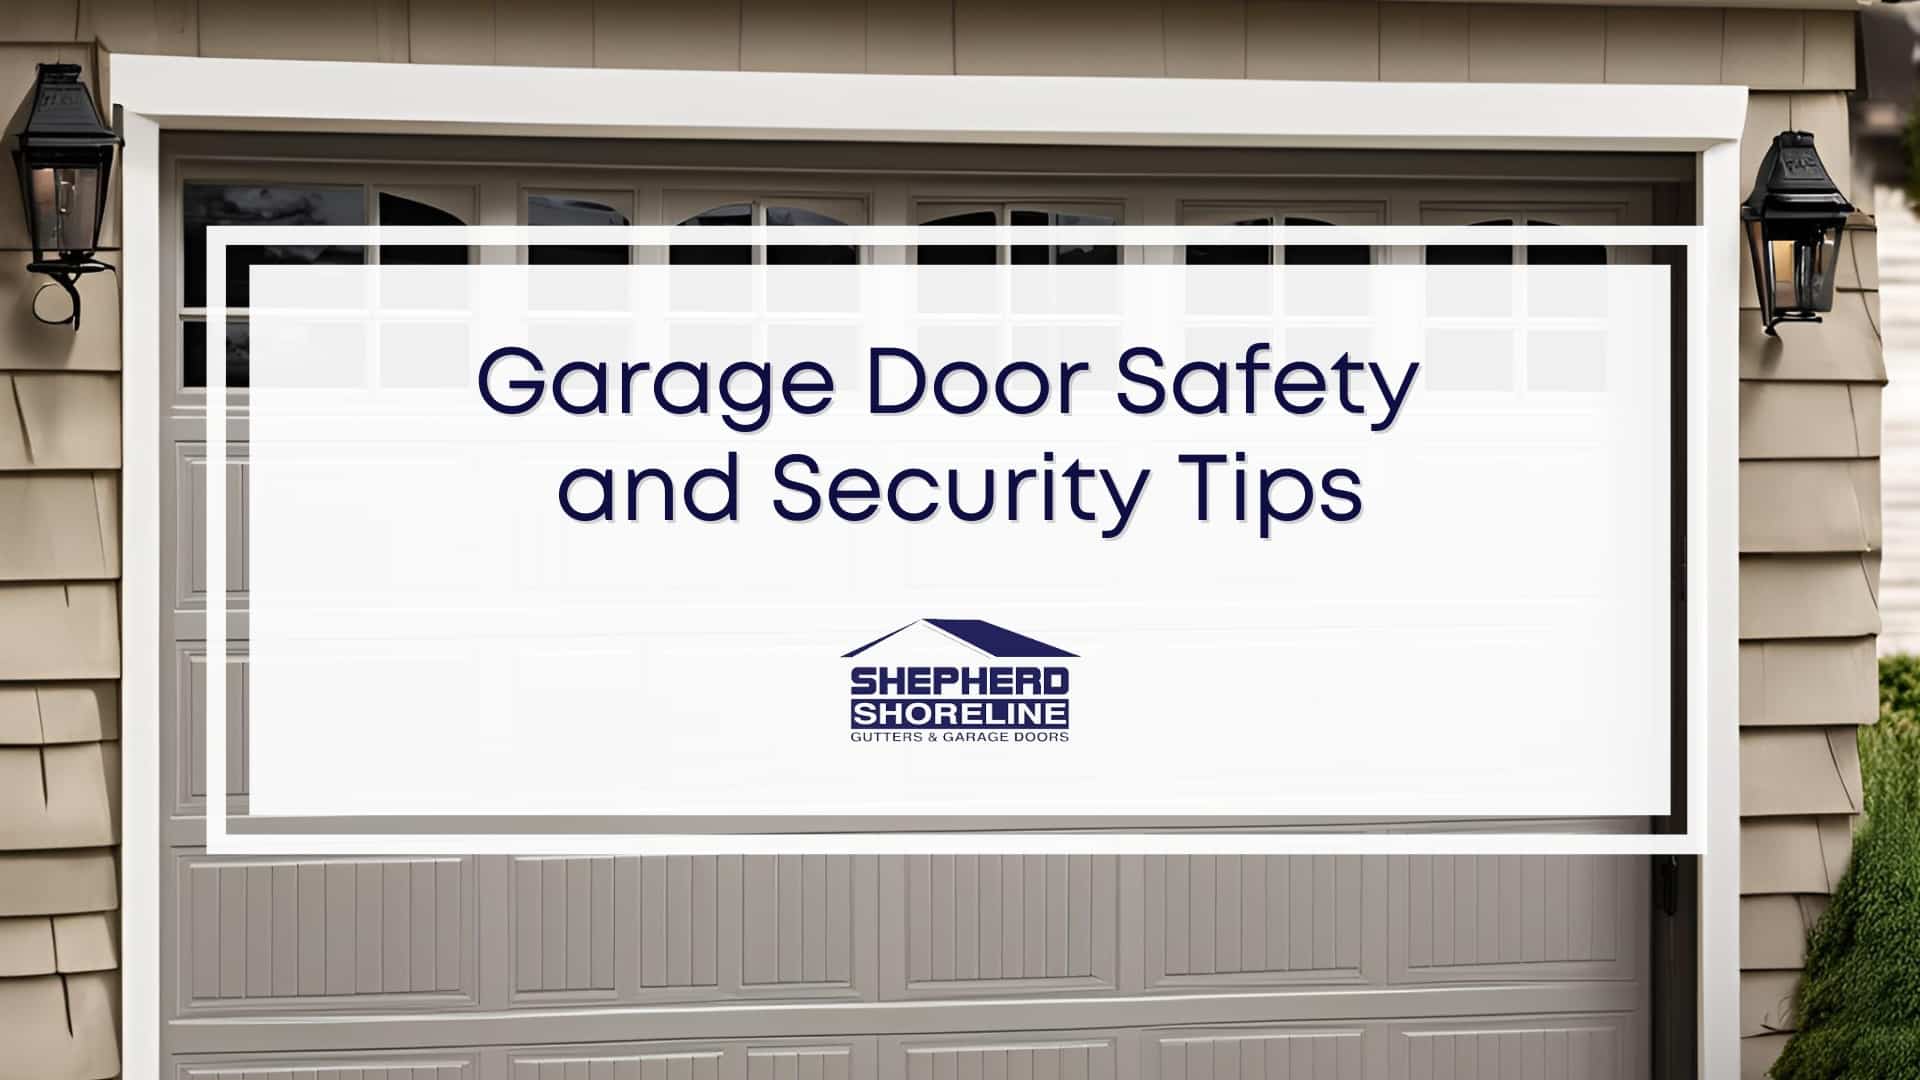 Featured image of garage door safety and security tips